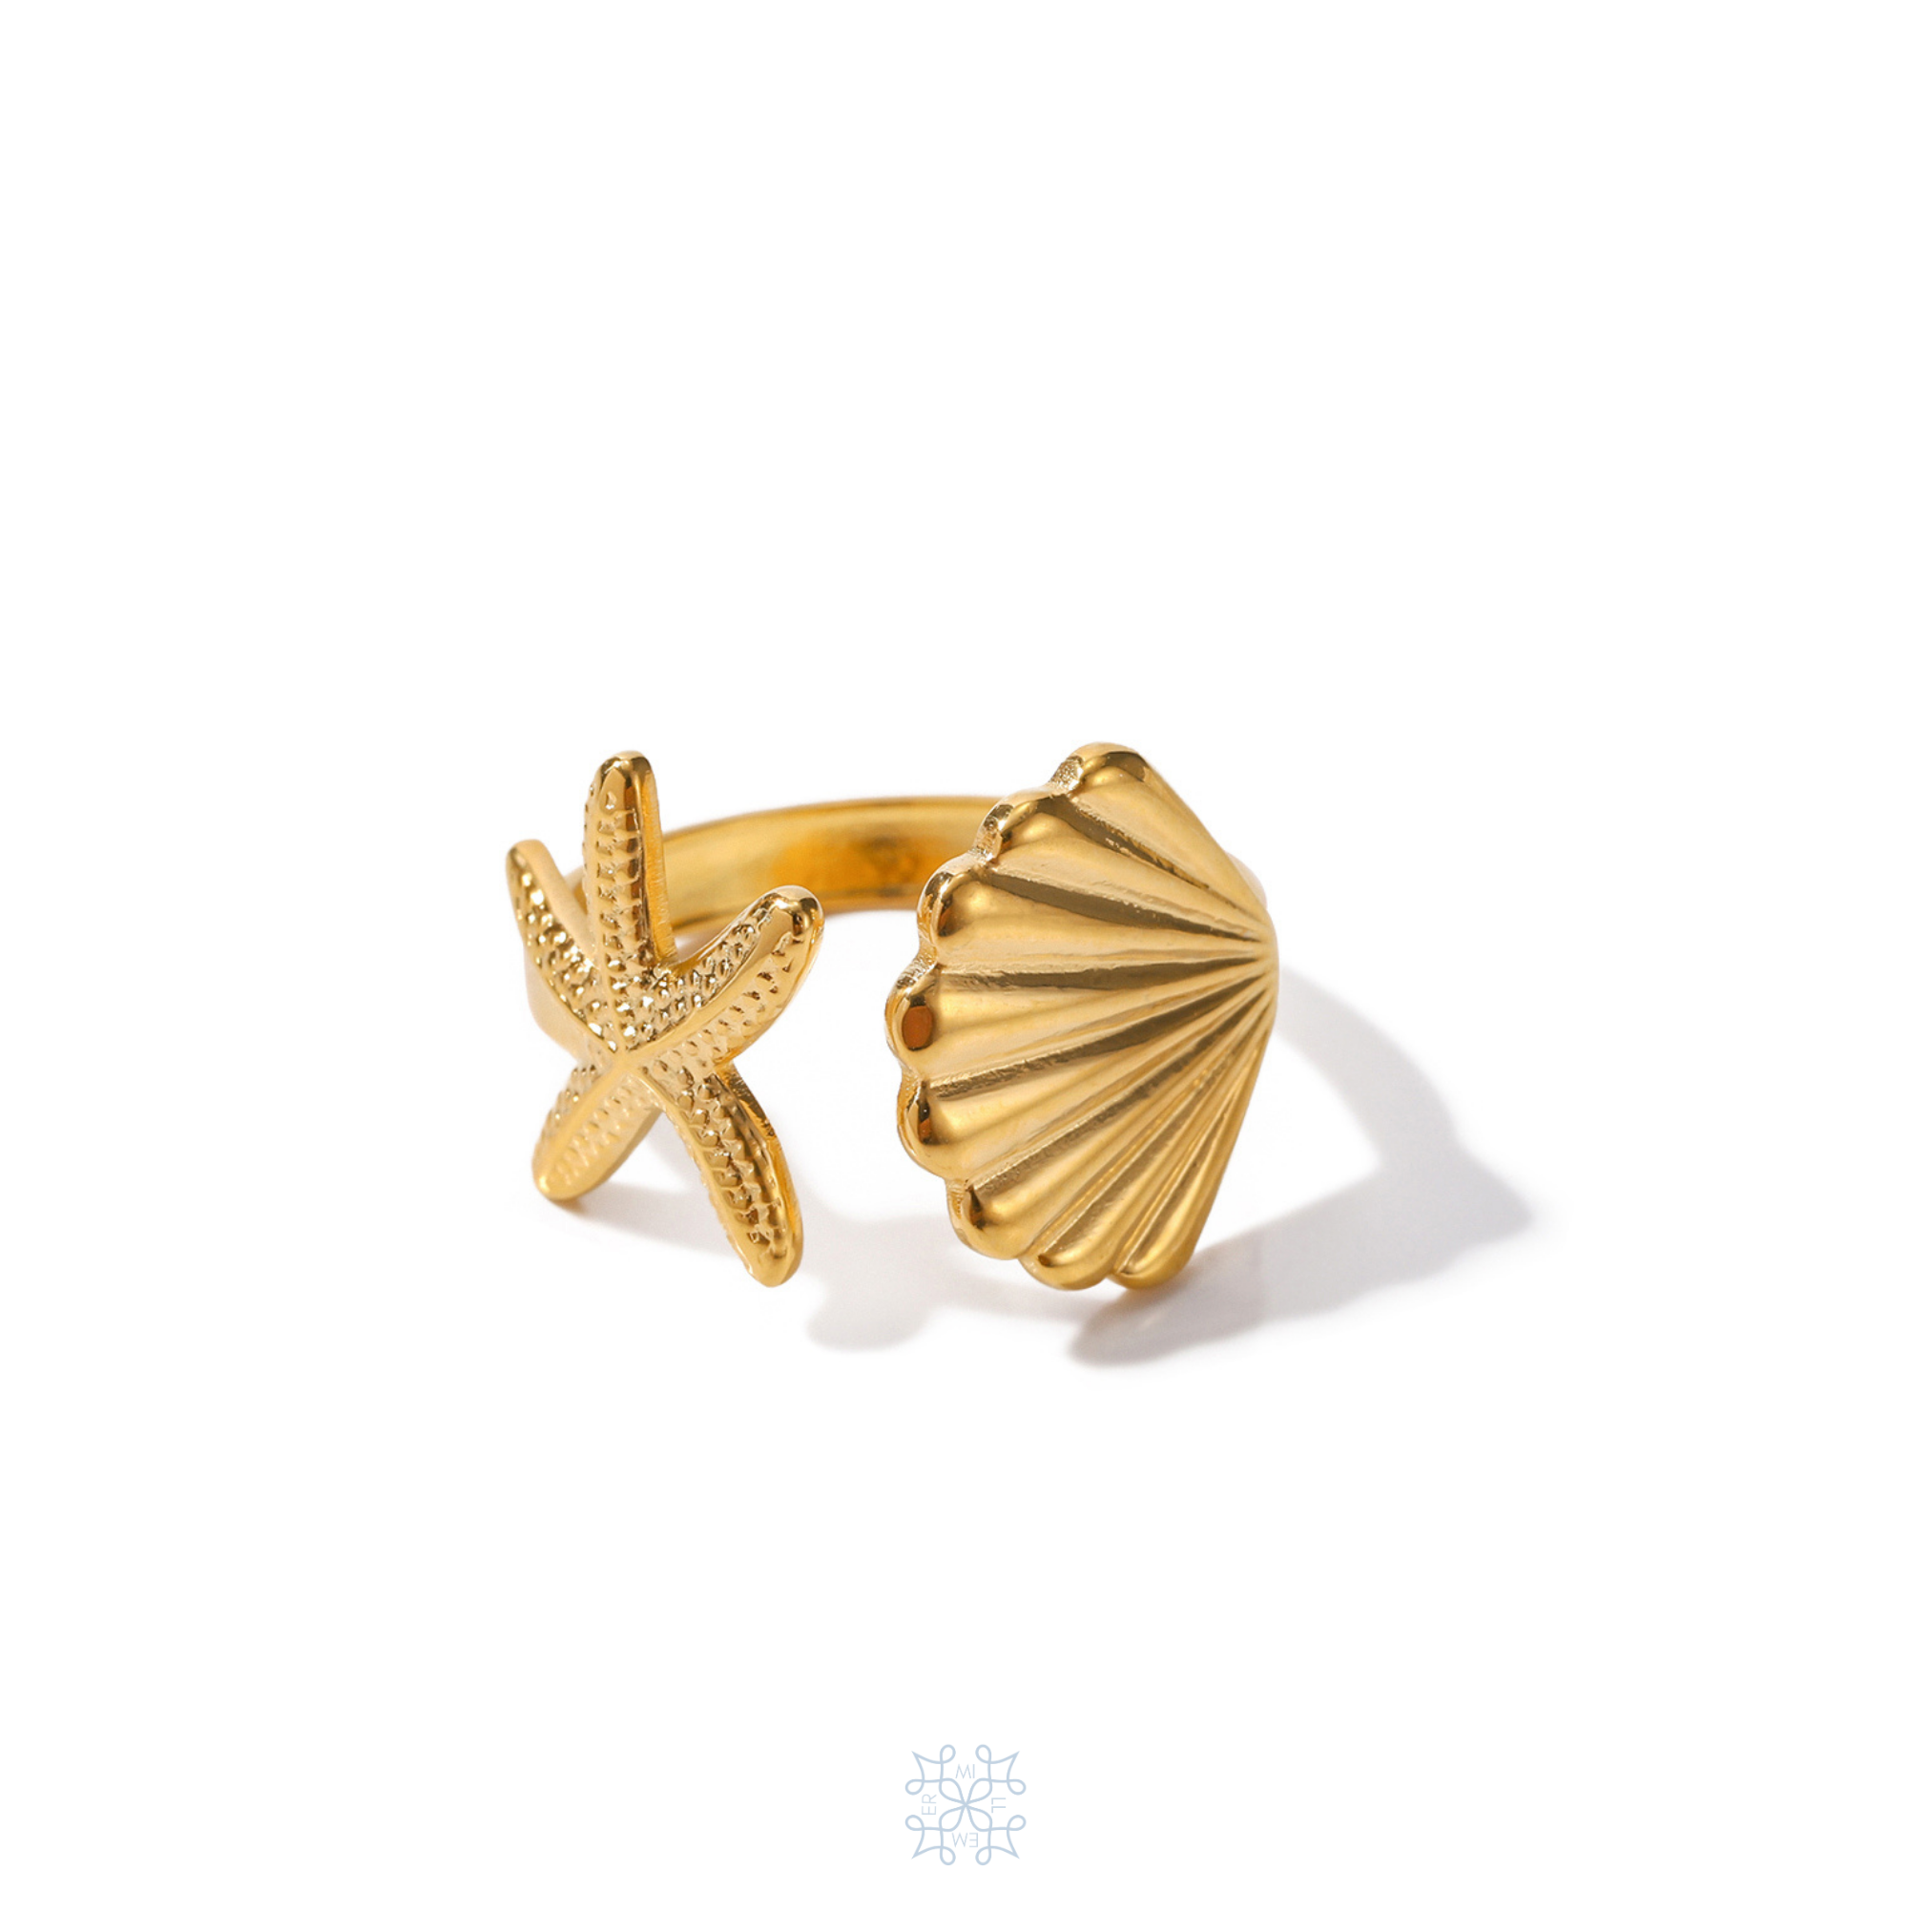 ISLE star and shell gold adjustable ring. A star fish on one side of the rinf and a shell on the other one. The front pf the ring is adjustable open space.